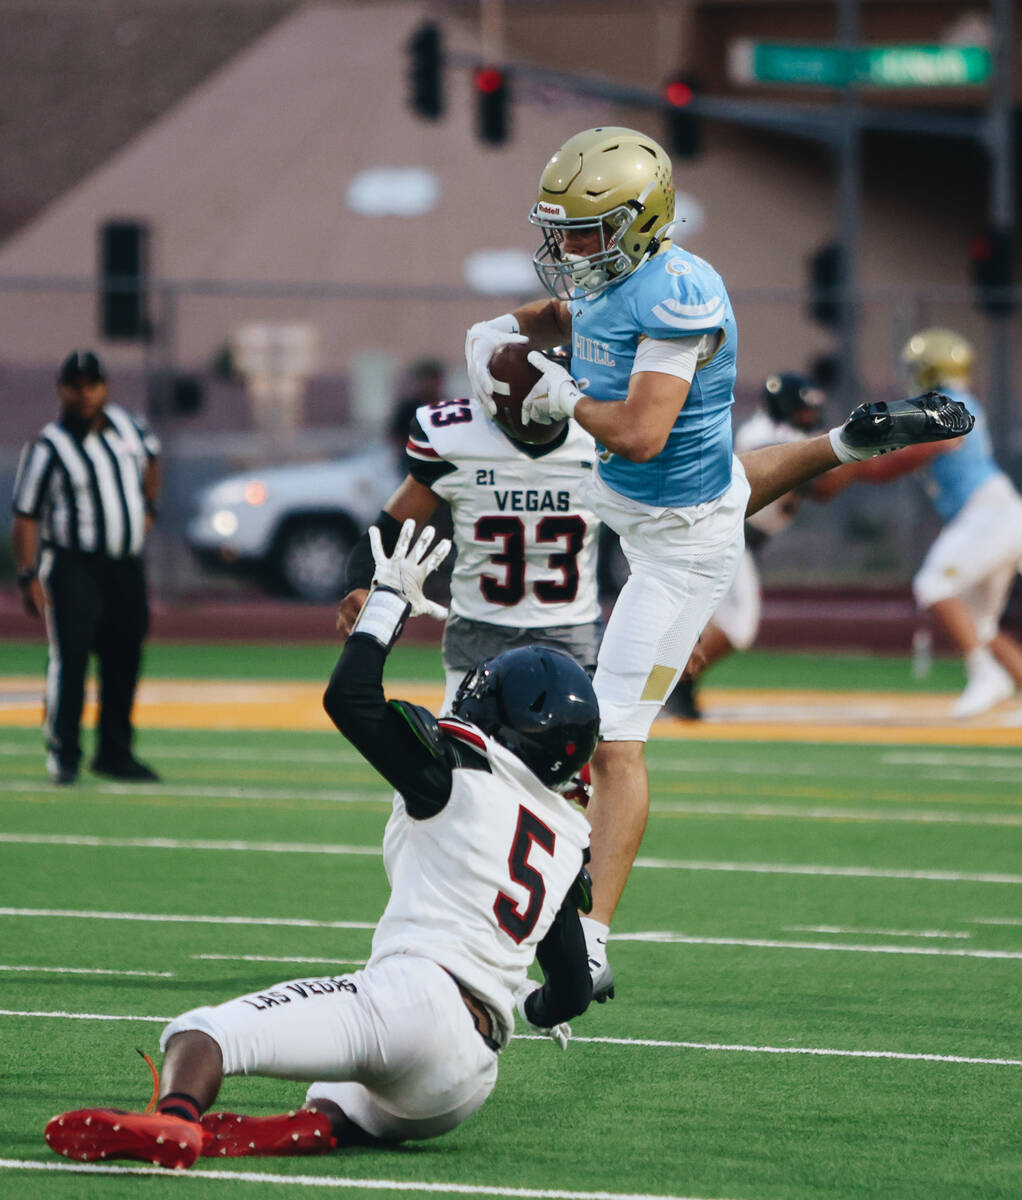 Foothill wide receiver Ethan Stubbs (6) makes a catch during a game against Las Vegas at Foothi ...